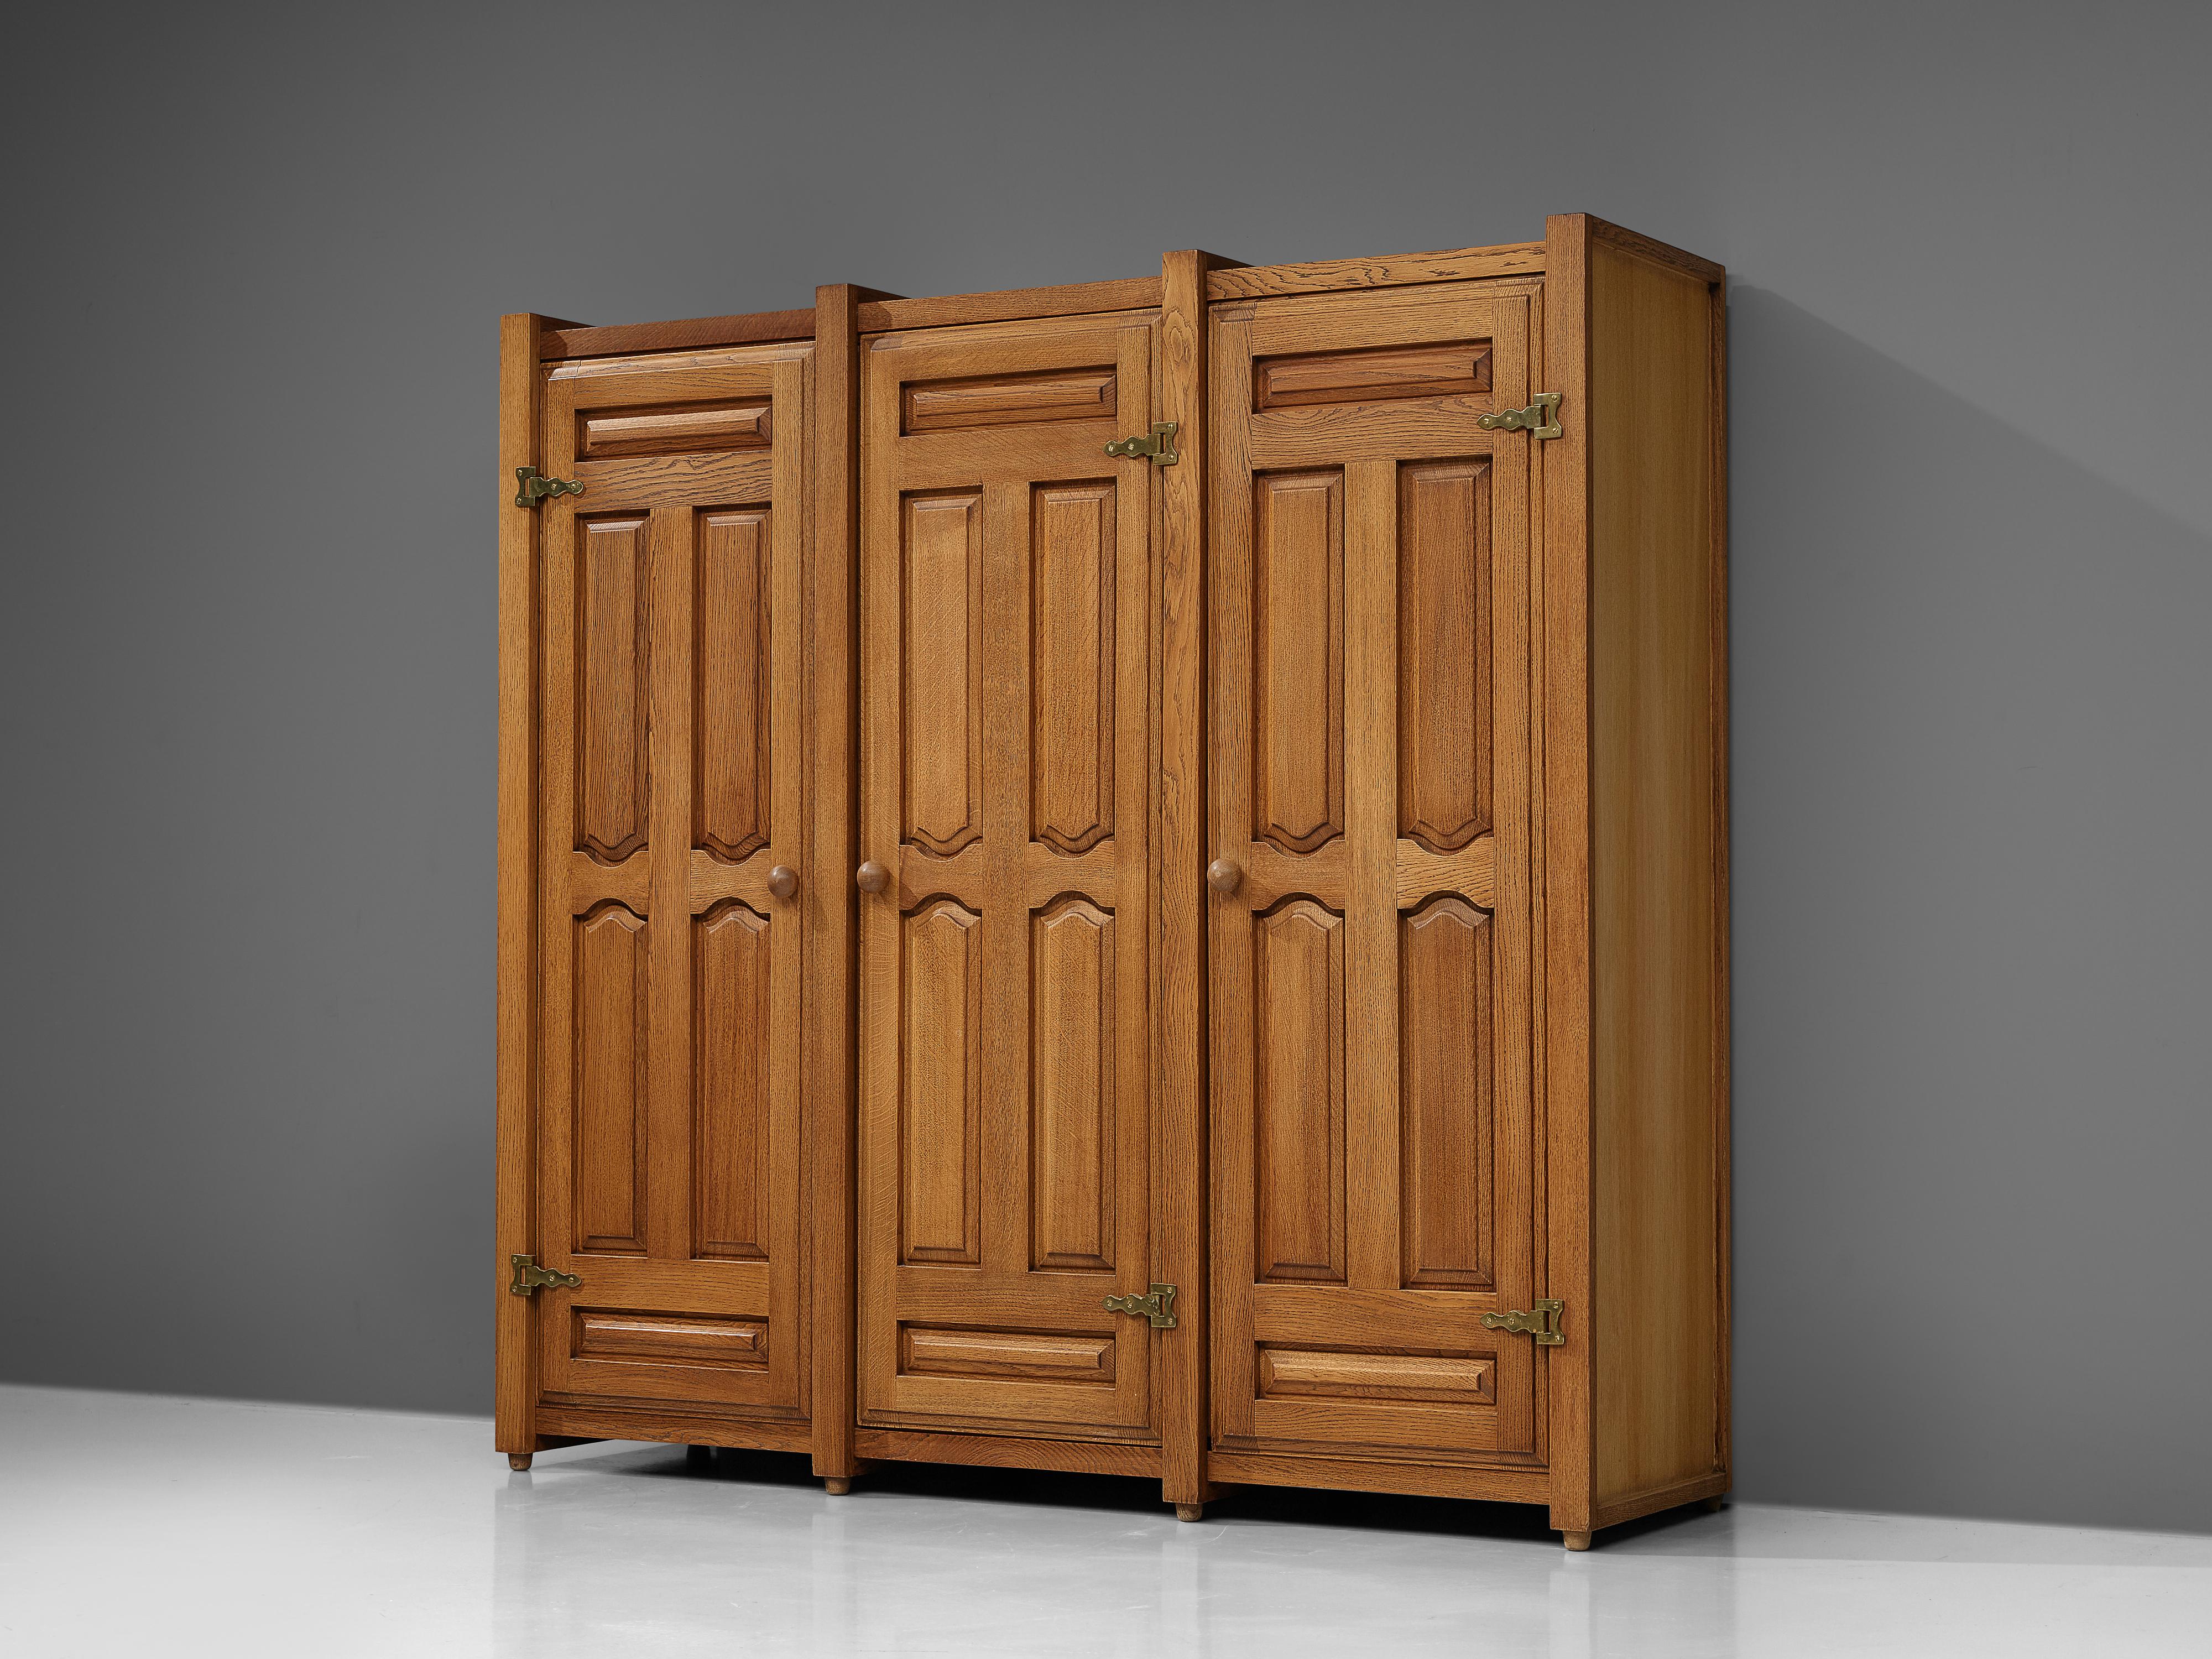 Guillerme et Chambron, cabinet or wardrobe, oak, brass, France, 1960s

This cabinet or wardrobe is designed by Guillerme et Chambron and features geometric engravings in the doors which is typical for the French duo. Playful round handles access the